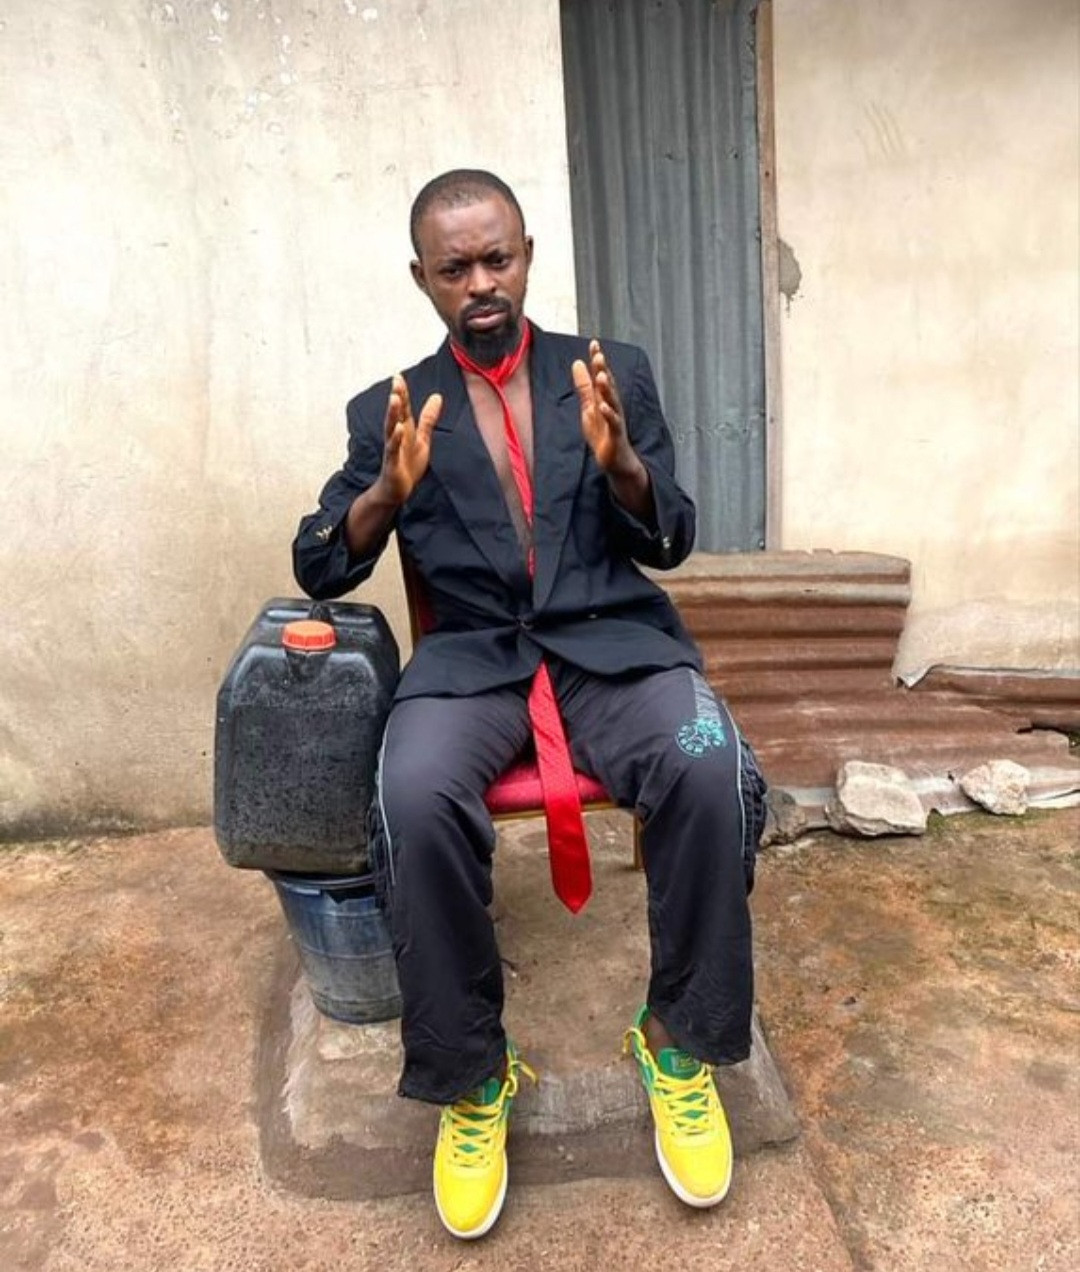 Nigerians begin #ShettimaChallenge to recreate outfit worn by Kashim Shettima to the NBA conference (photos)